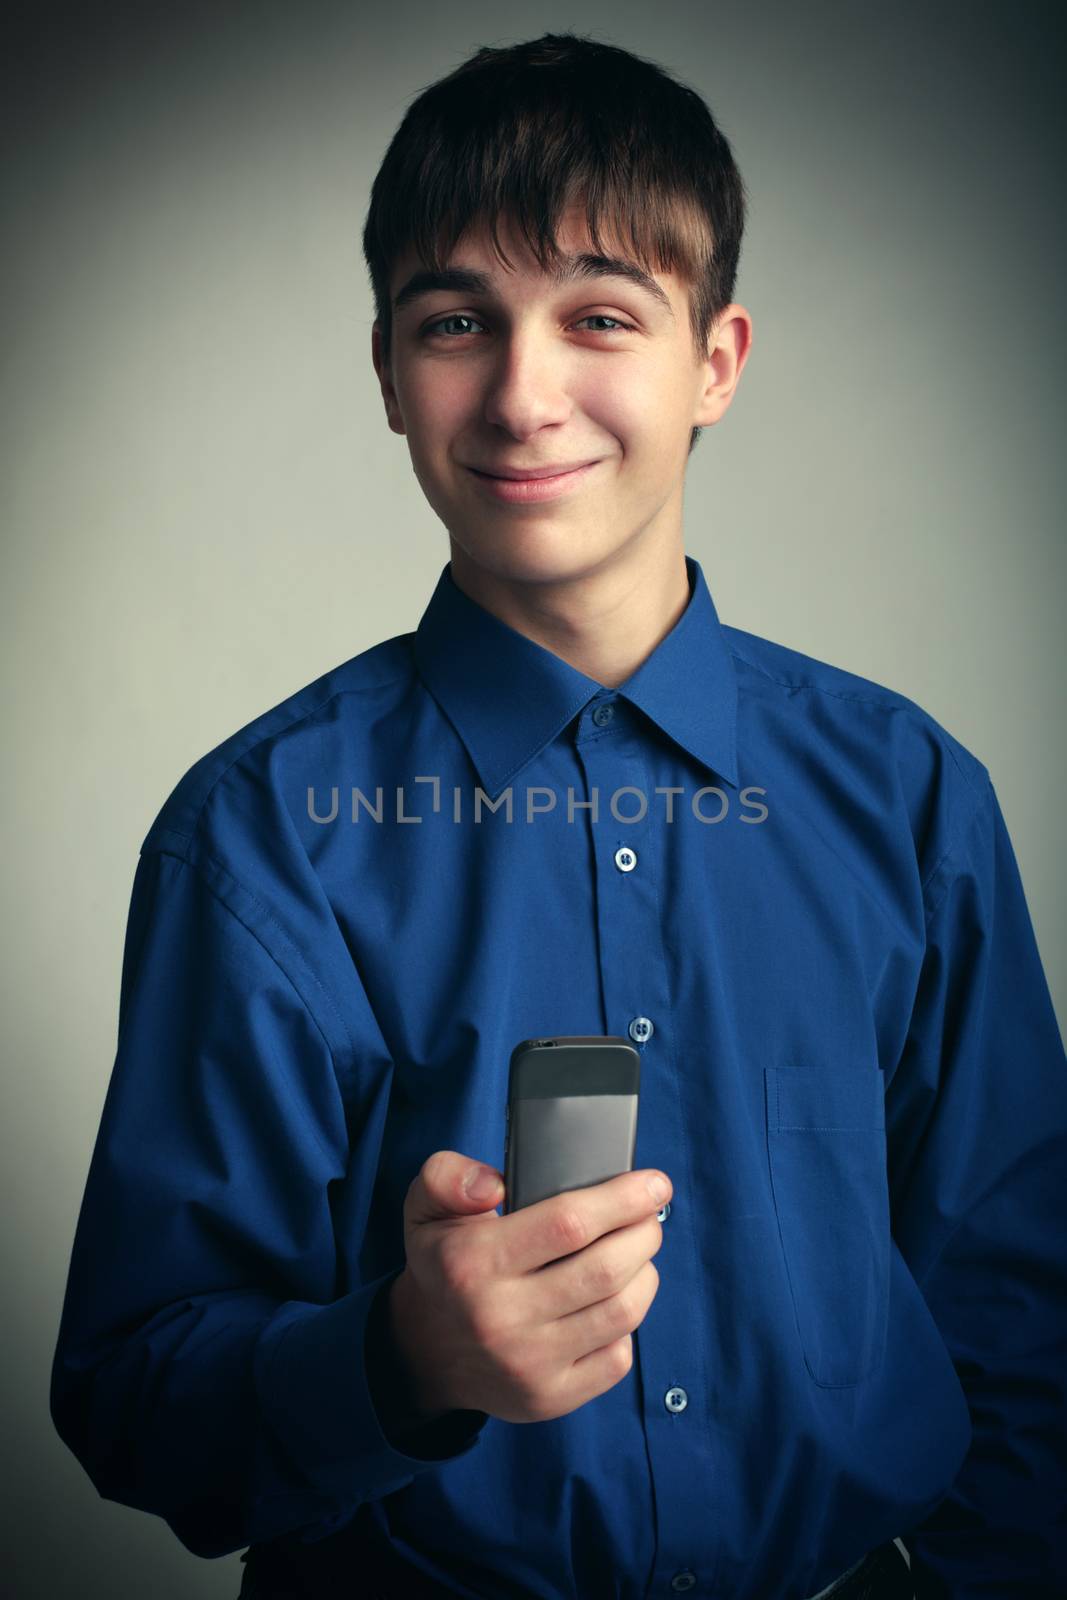 Vignetting Photo of Cheerful Teenager with Cellphone